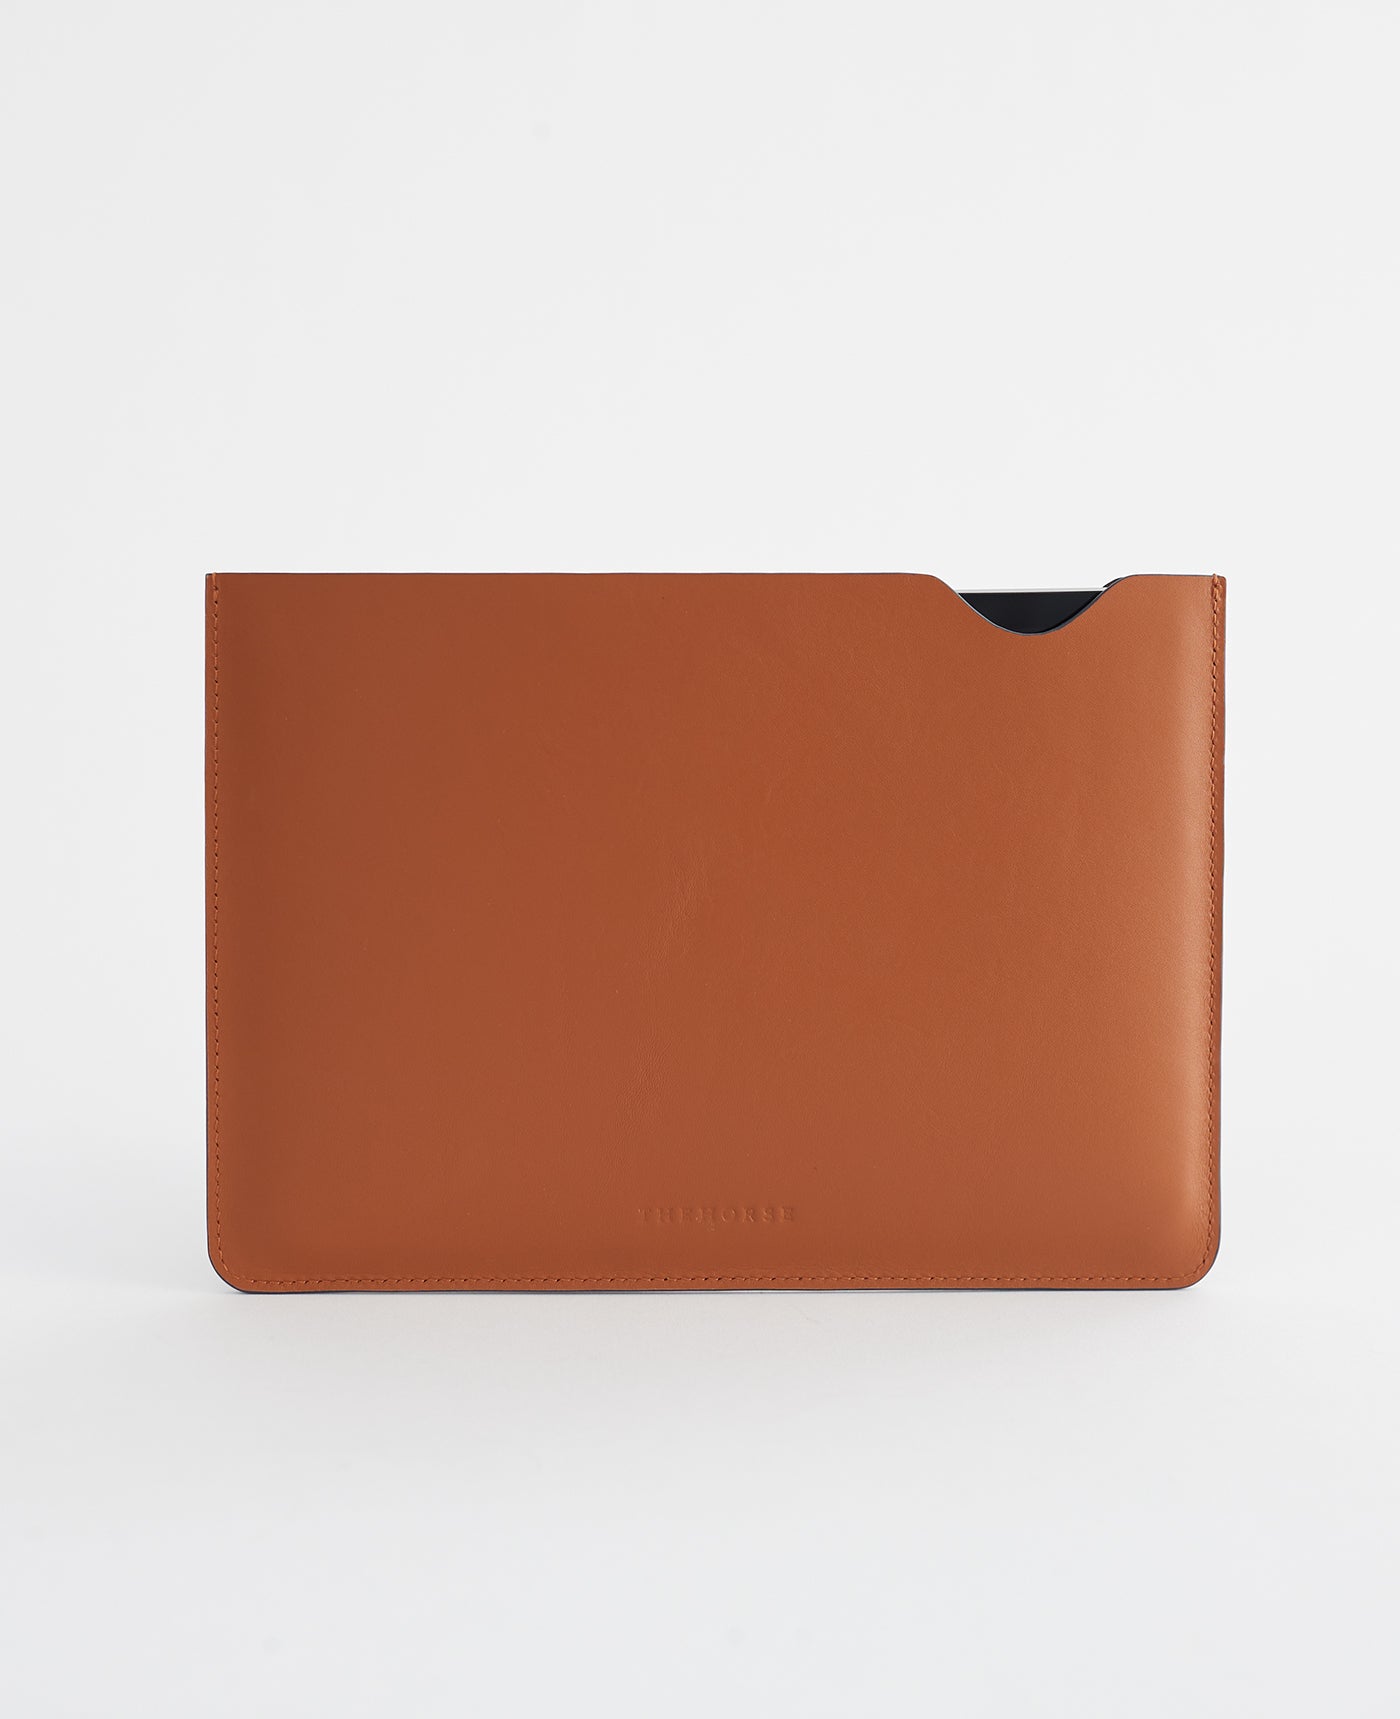 iPad Air Leather Sleeve in Tan by The Horse®